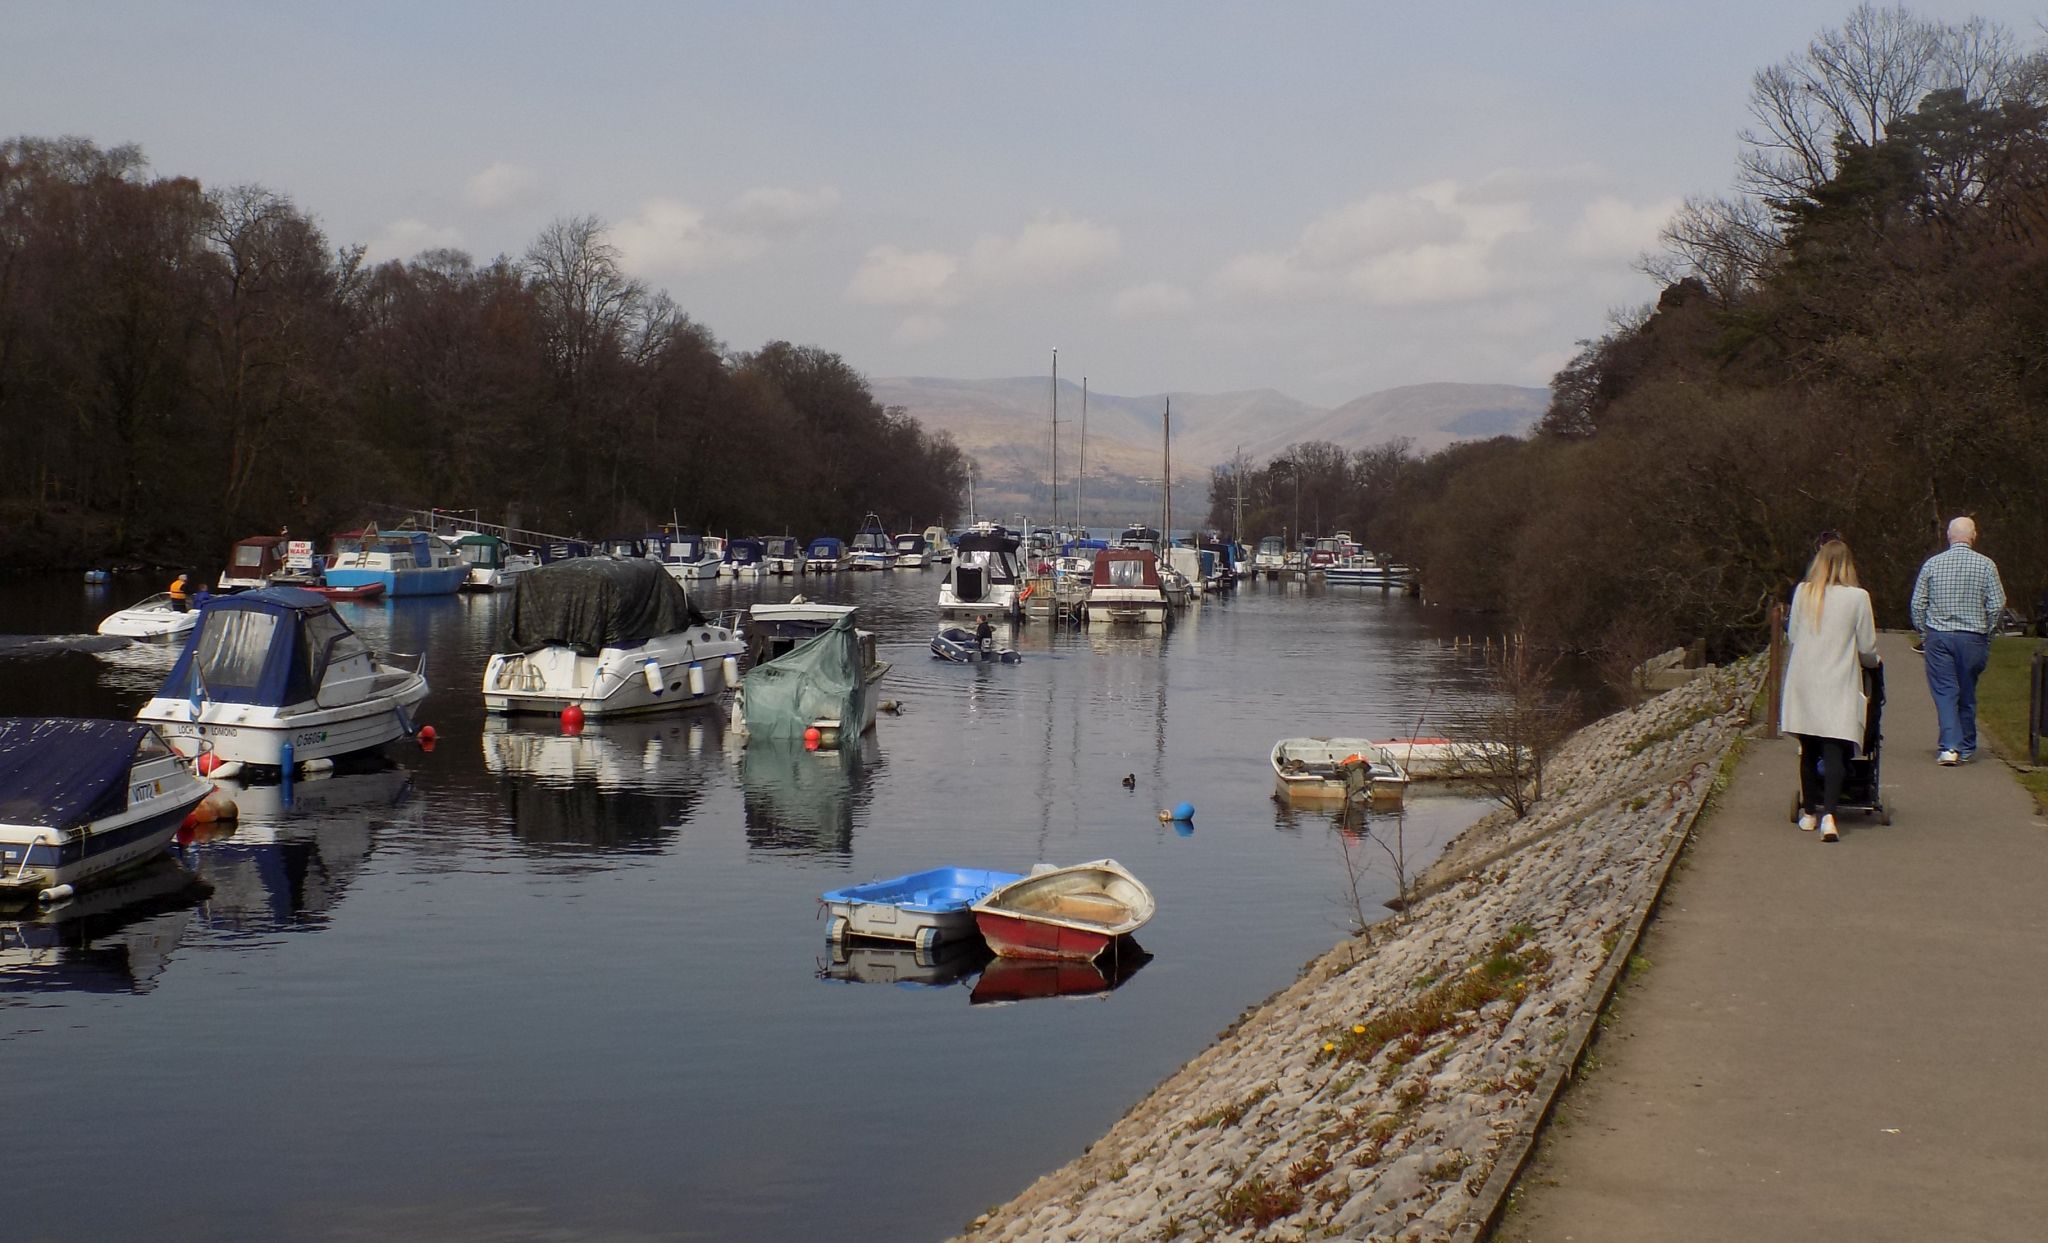 Boats in River Leven at entrance to Balloch Country Park